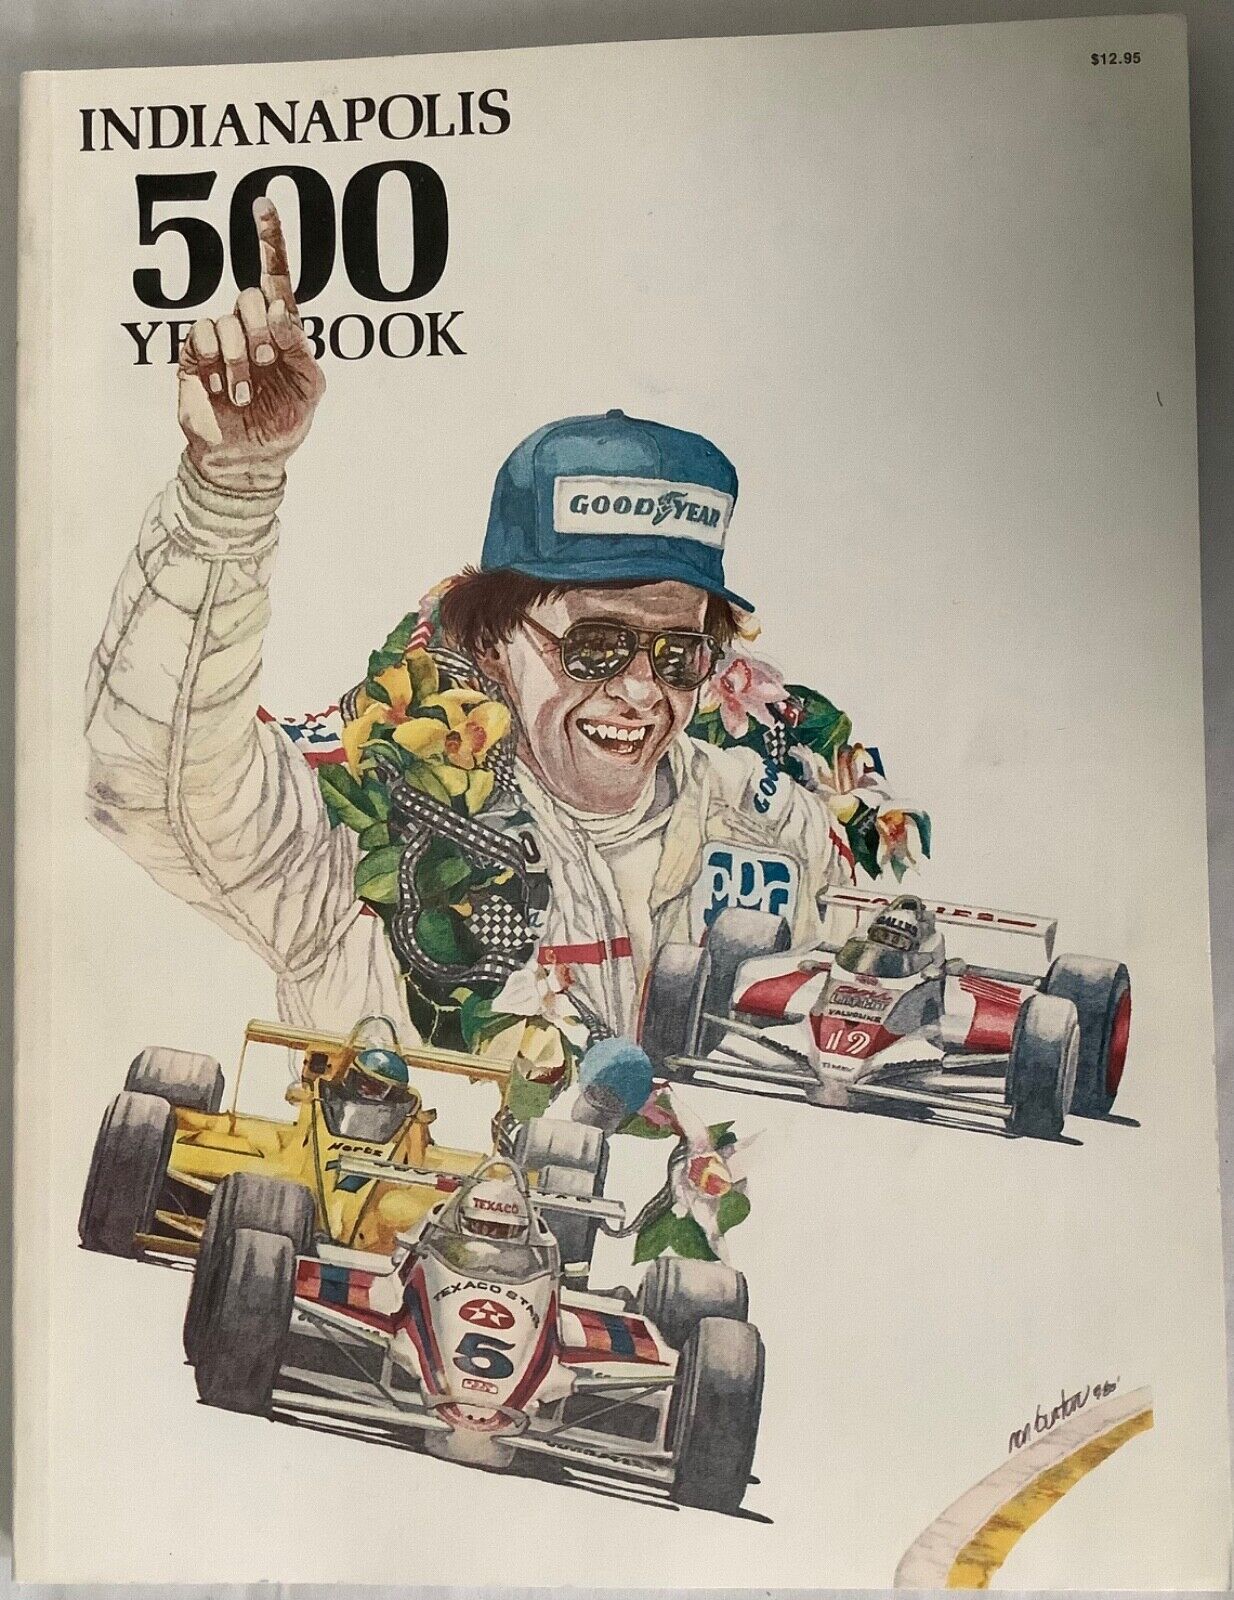 1983 Indianapolis 500 Yearbook, Hungness